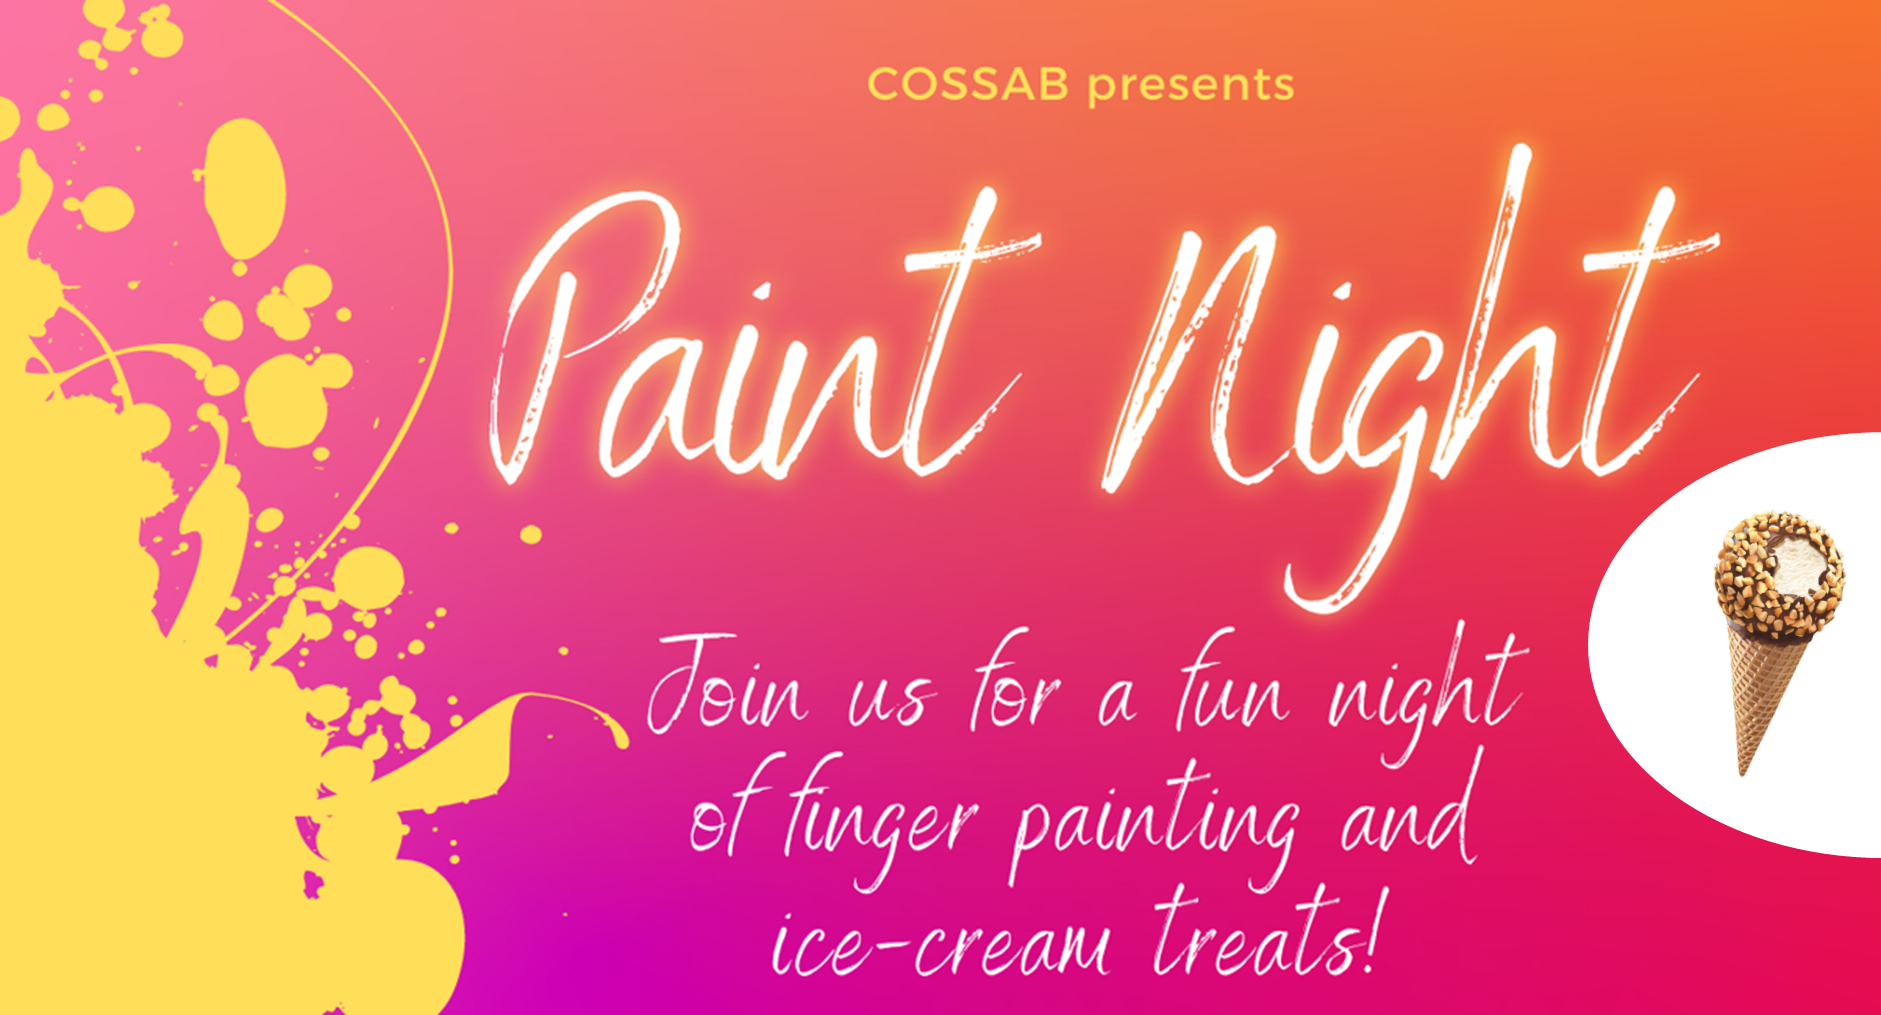 College of Science Paint Night , February 22 from 7pm-8pm in Gosnell Hall Atrium